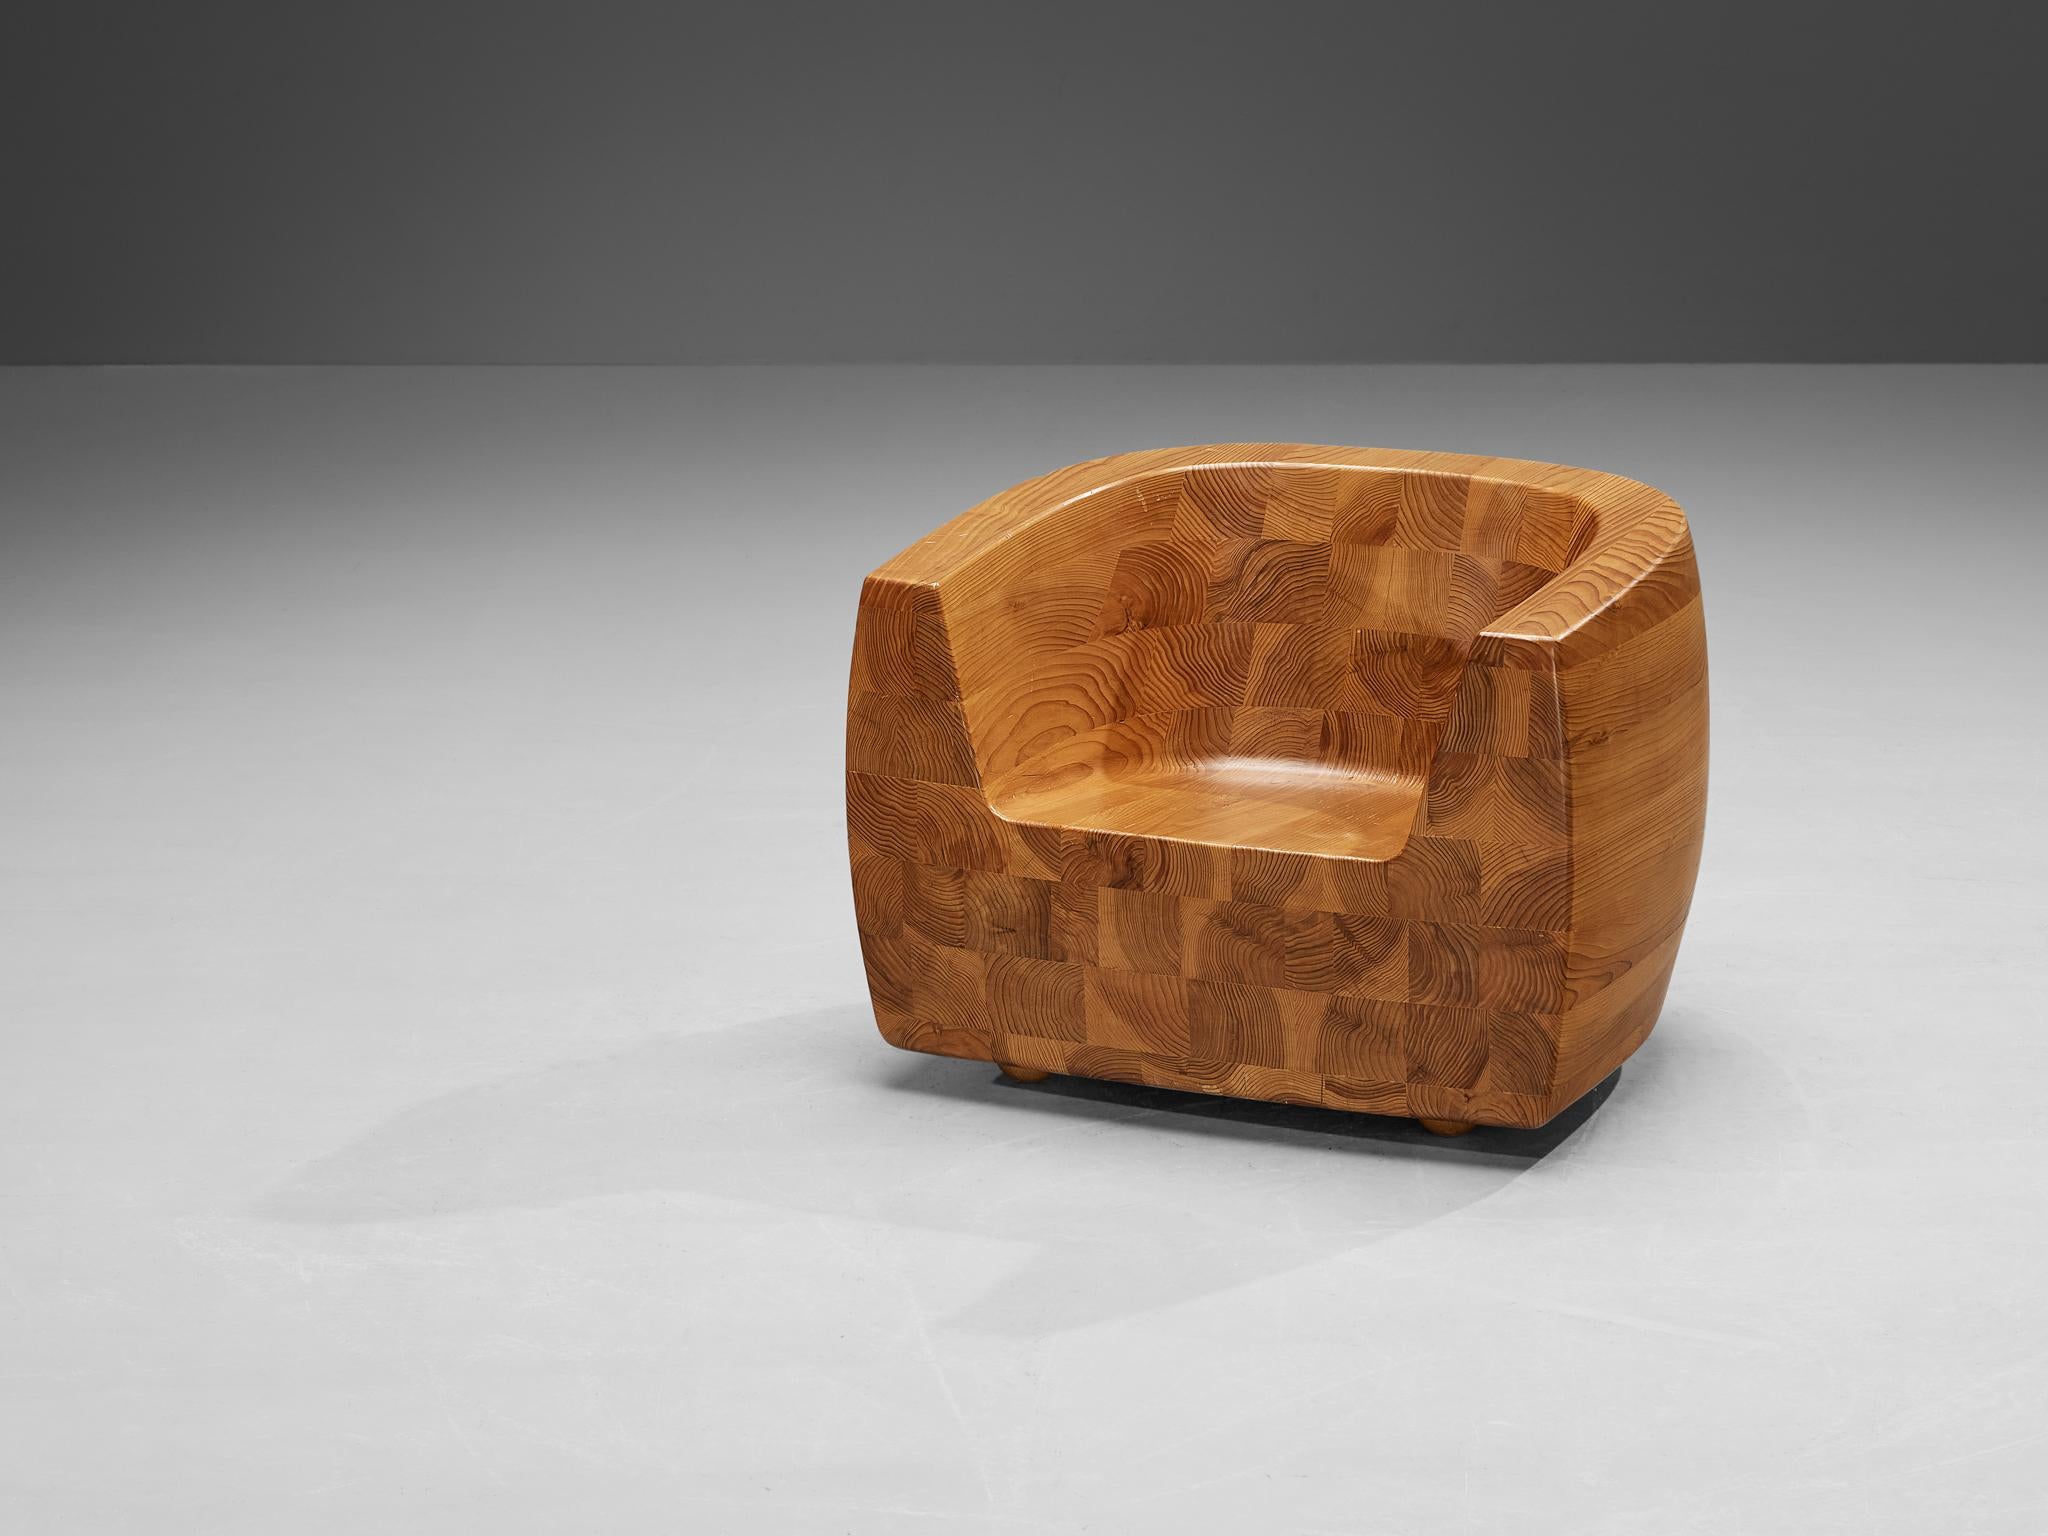 Isamu Kenmochi for Tendo Mokko, ‘Kashiwado’ chair, Japanese Cedar, Japan, 1961

Isamu Kenmochi embarked on a quest to conceive a universally remarkable object, one characterized by the innate beauty of simplicity, firmly rooted in an understanding